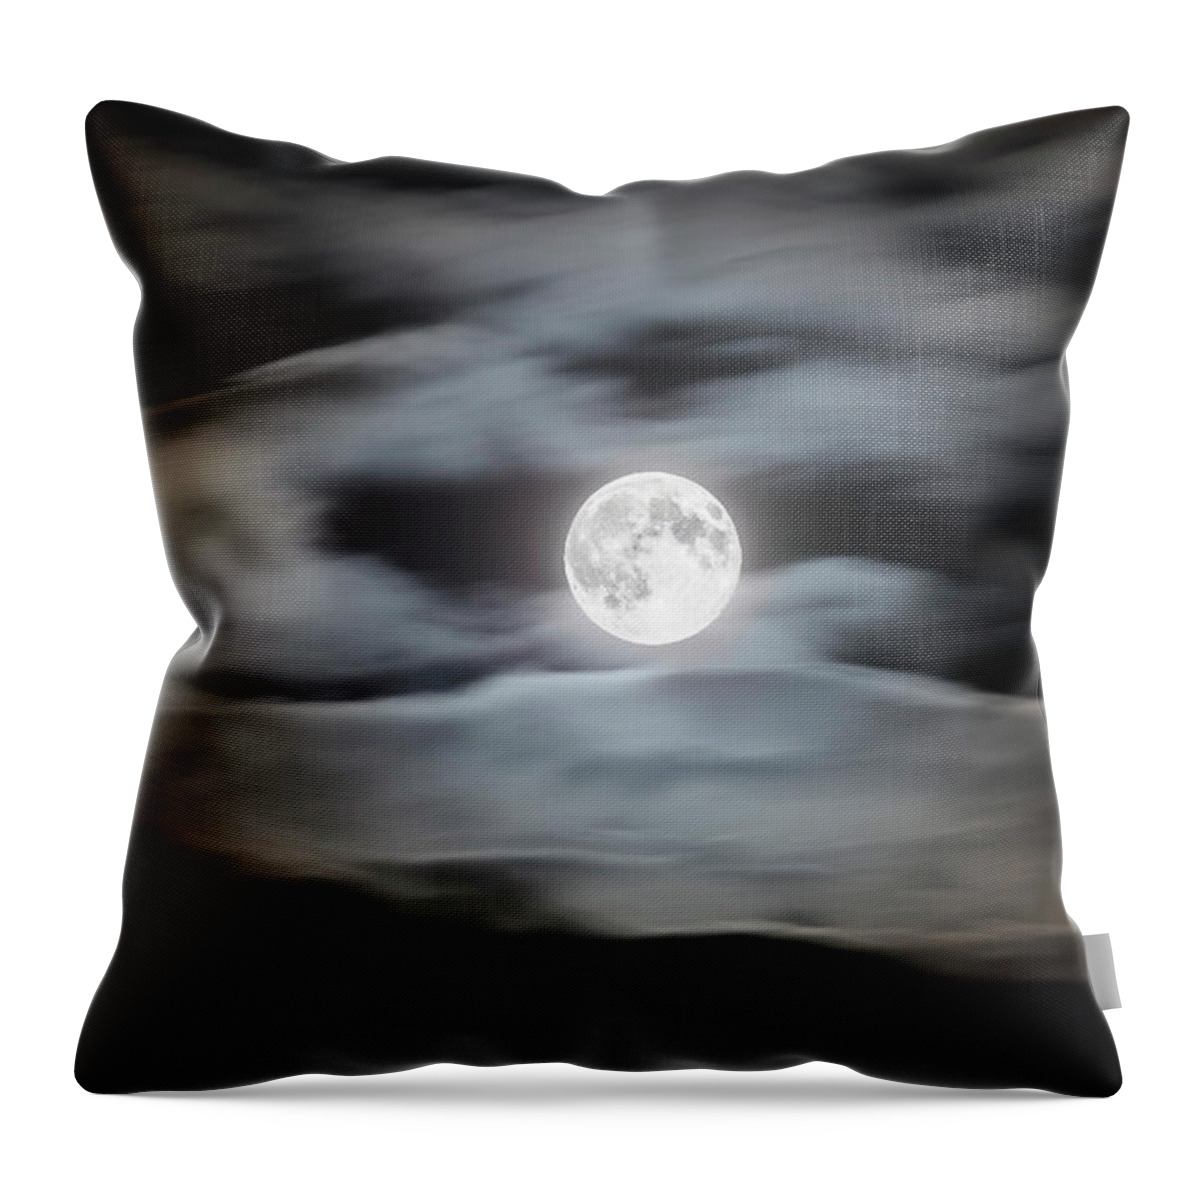 Spooky Throw Pillow featuring the photograph Full Moon On A Cloudy Night Sky by Bjorn Holland